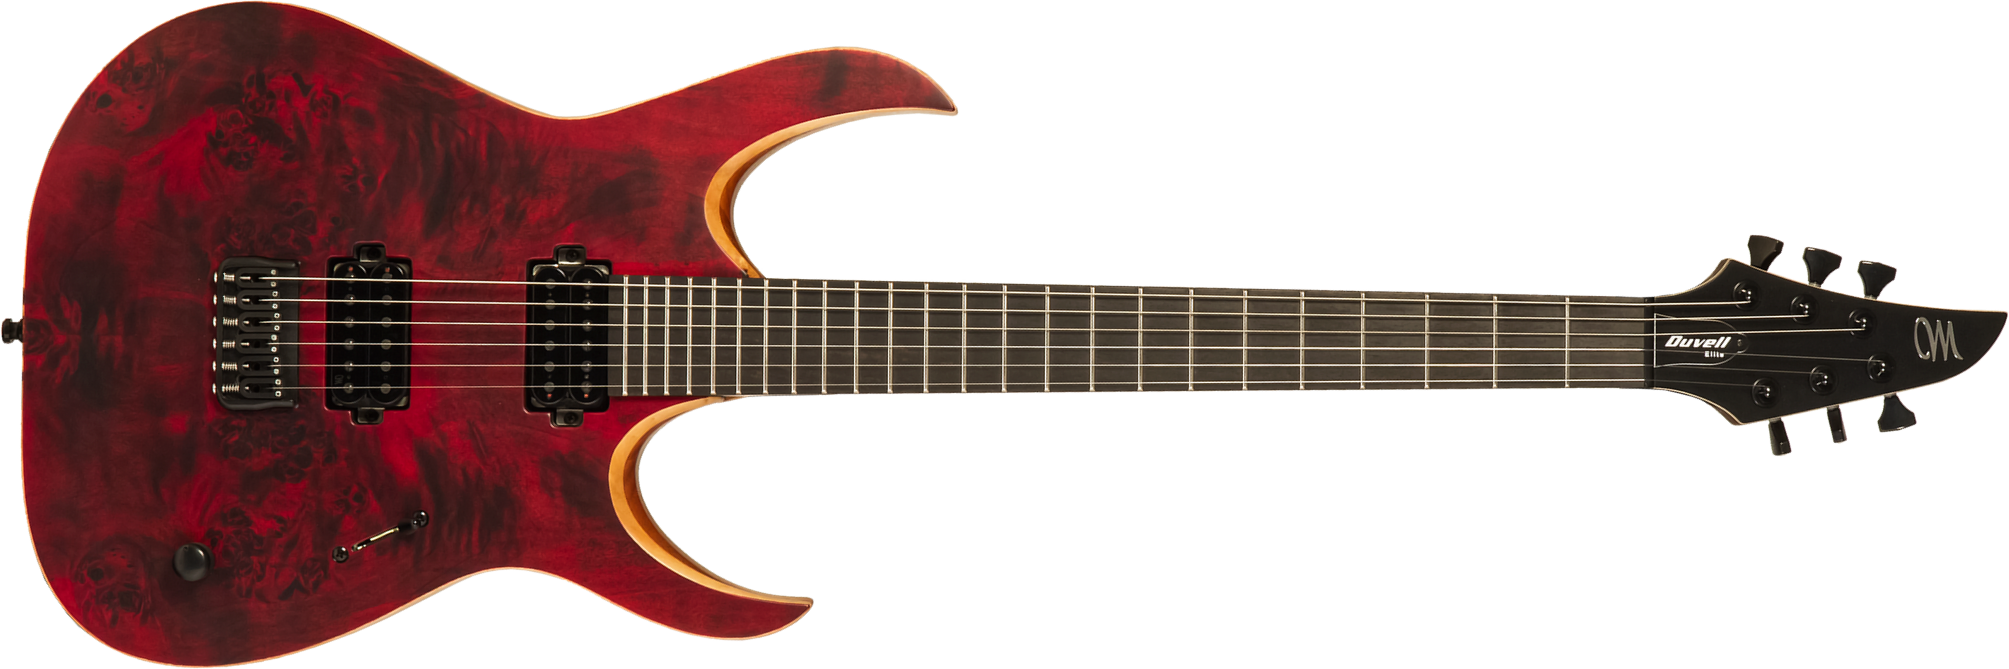 Mayones Guitars Duvell Elite 6 2h Bare Knuckle Ht Eb #df2301294 - Trans Dirty Red Satine - Metal electric guitar - Main picture